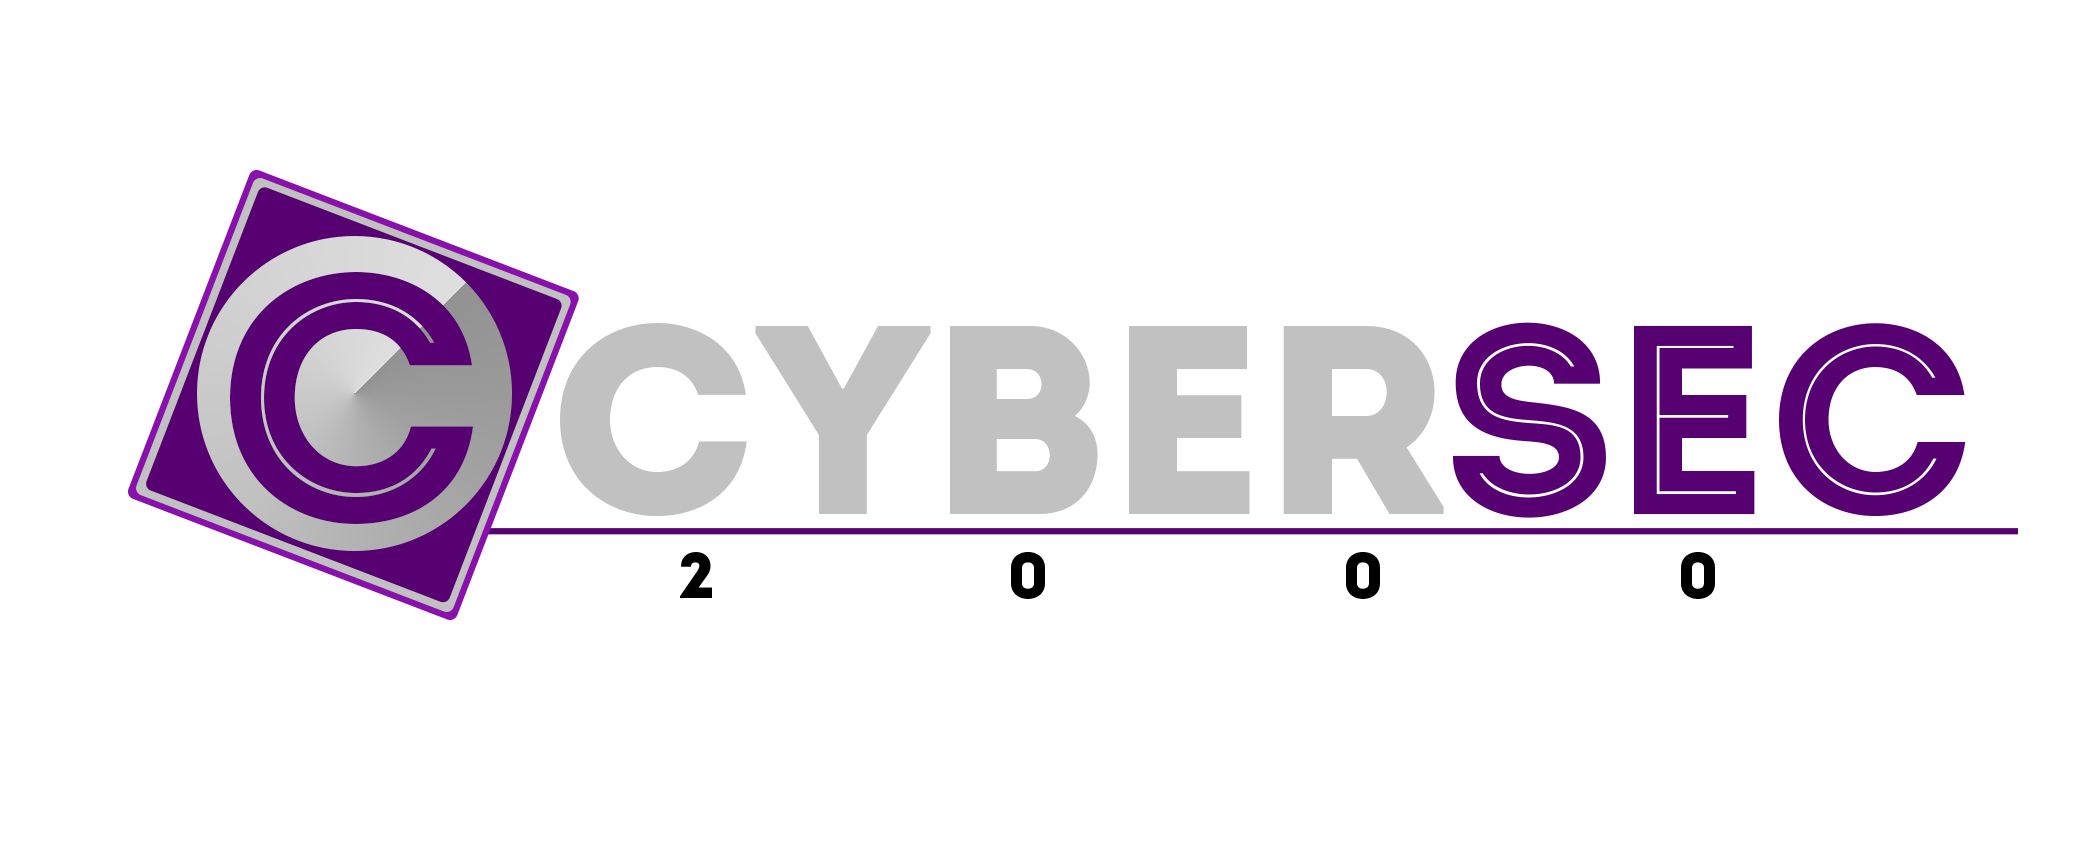 Cyber Security Career 1-Day Intensive Workshop